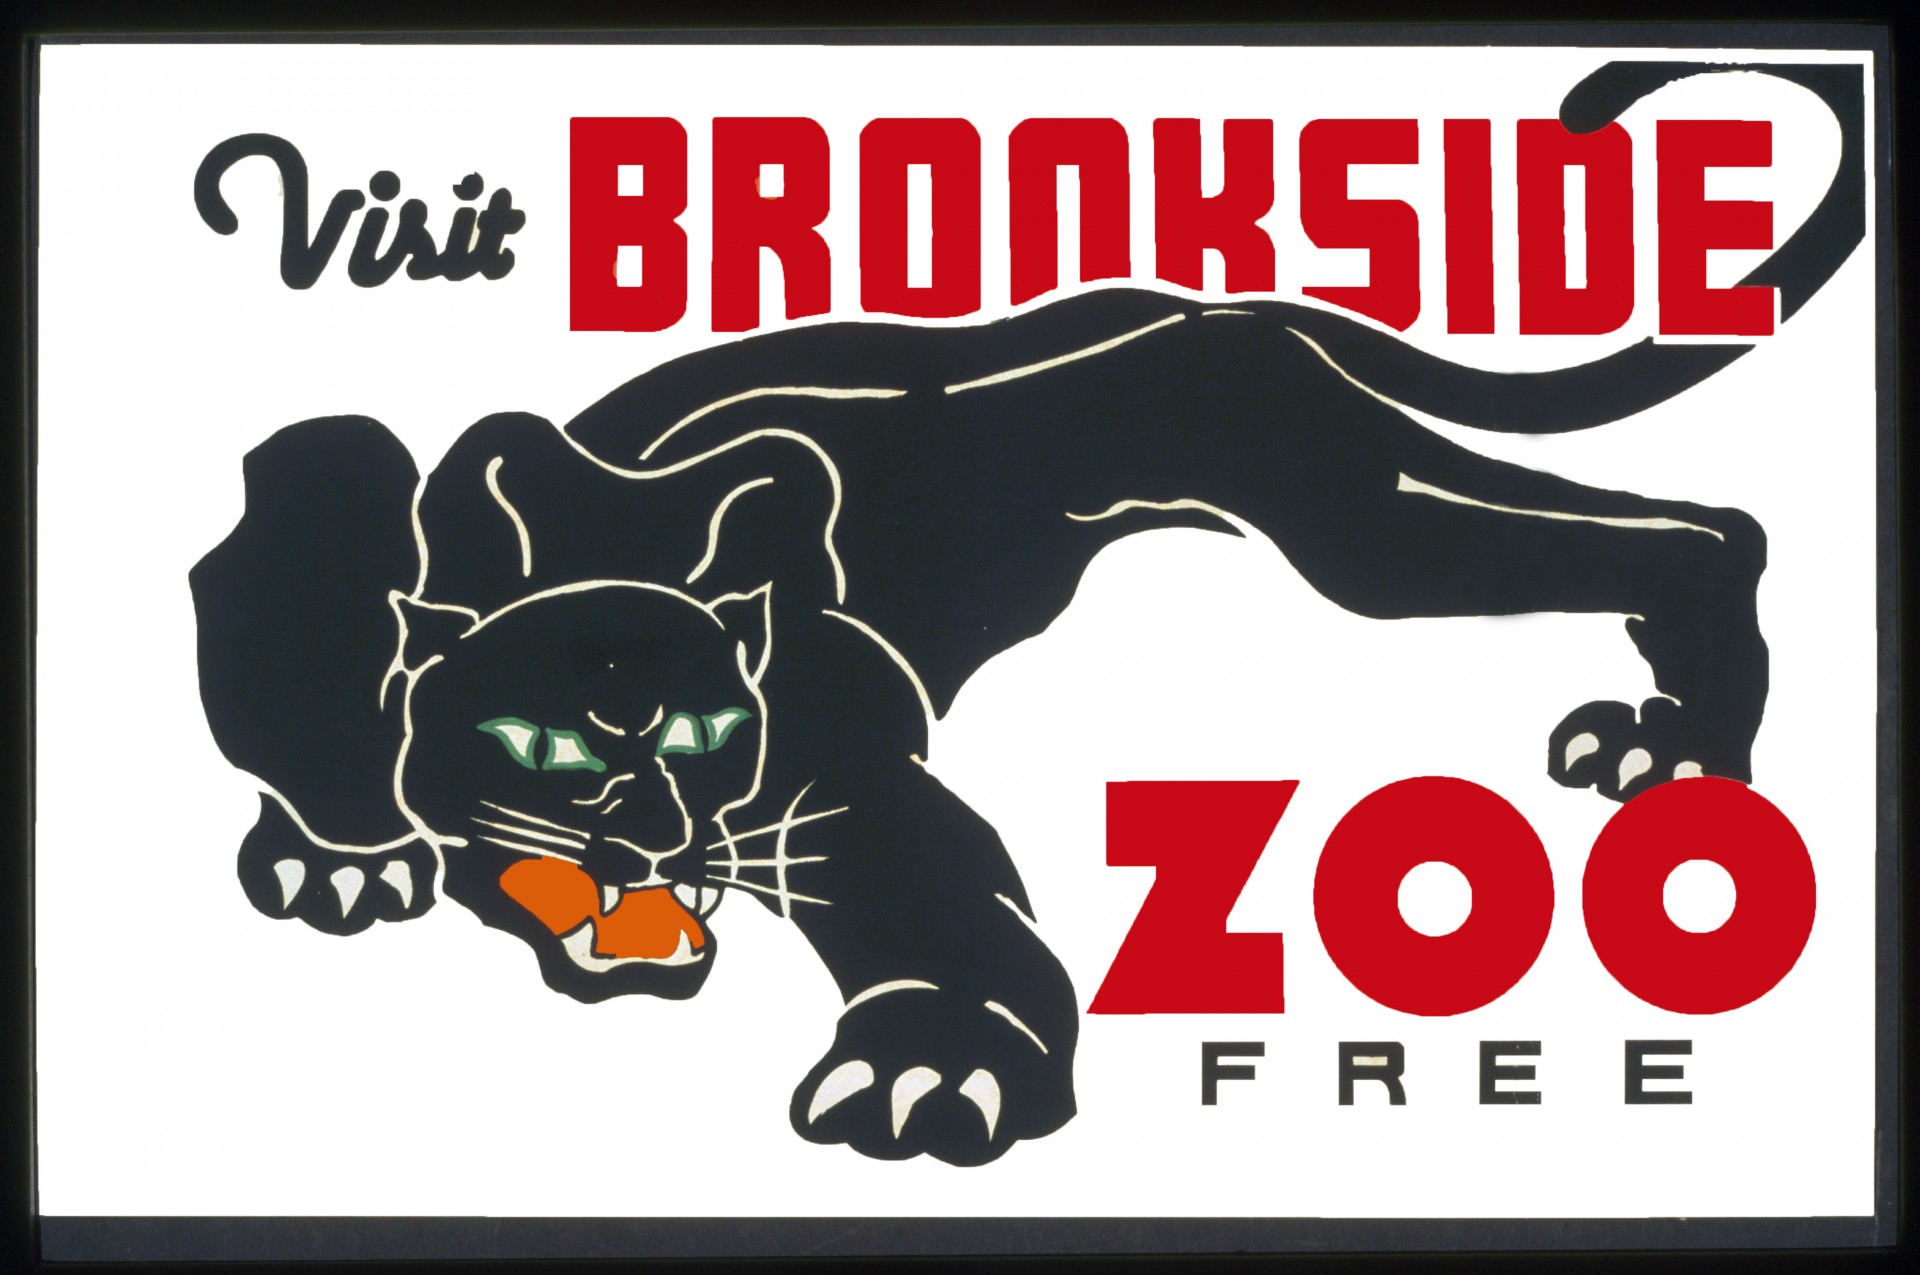 Public domain vintage poster visit Brookside Zoo with black panther